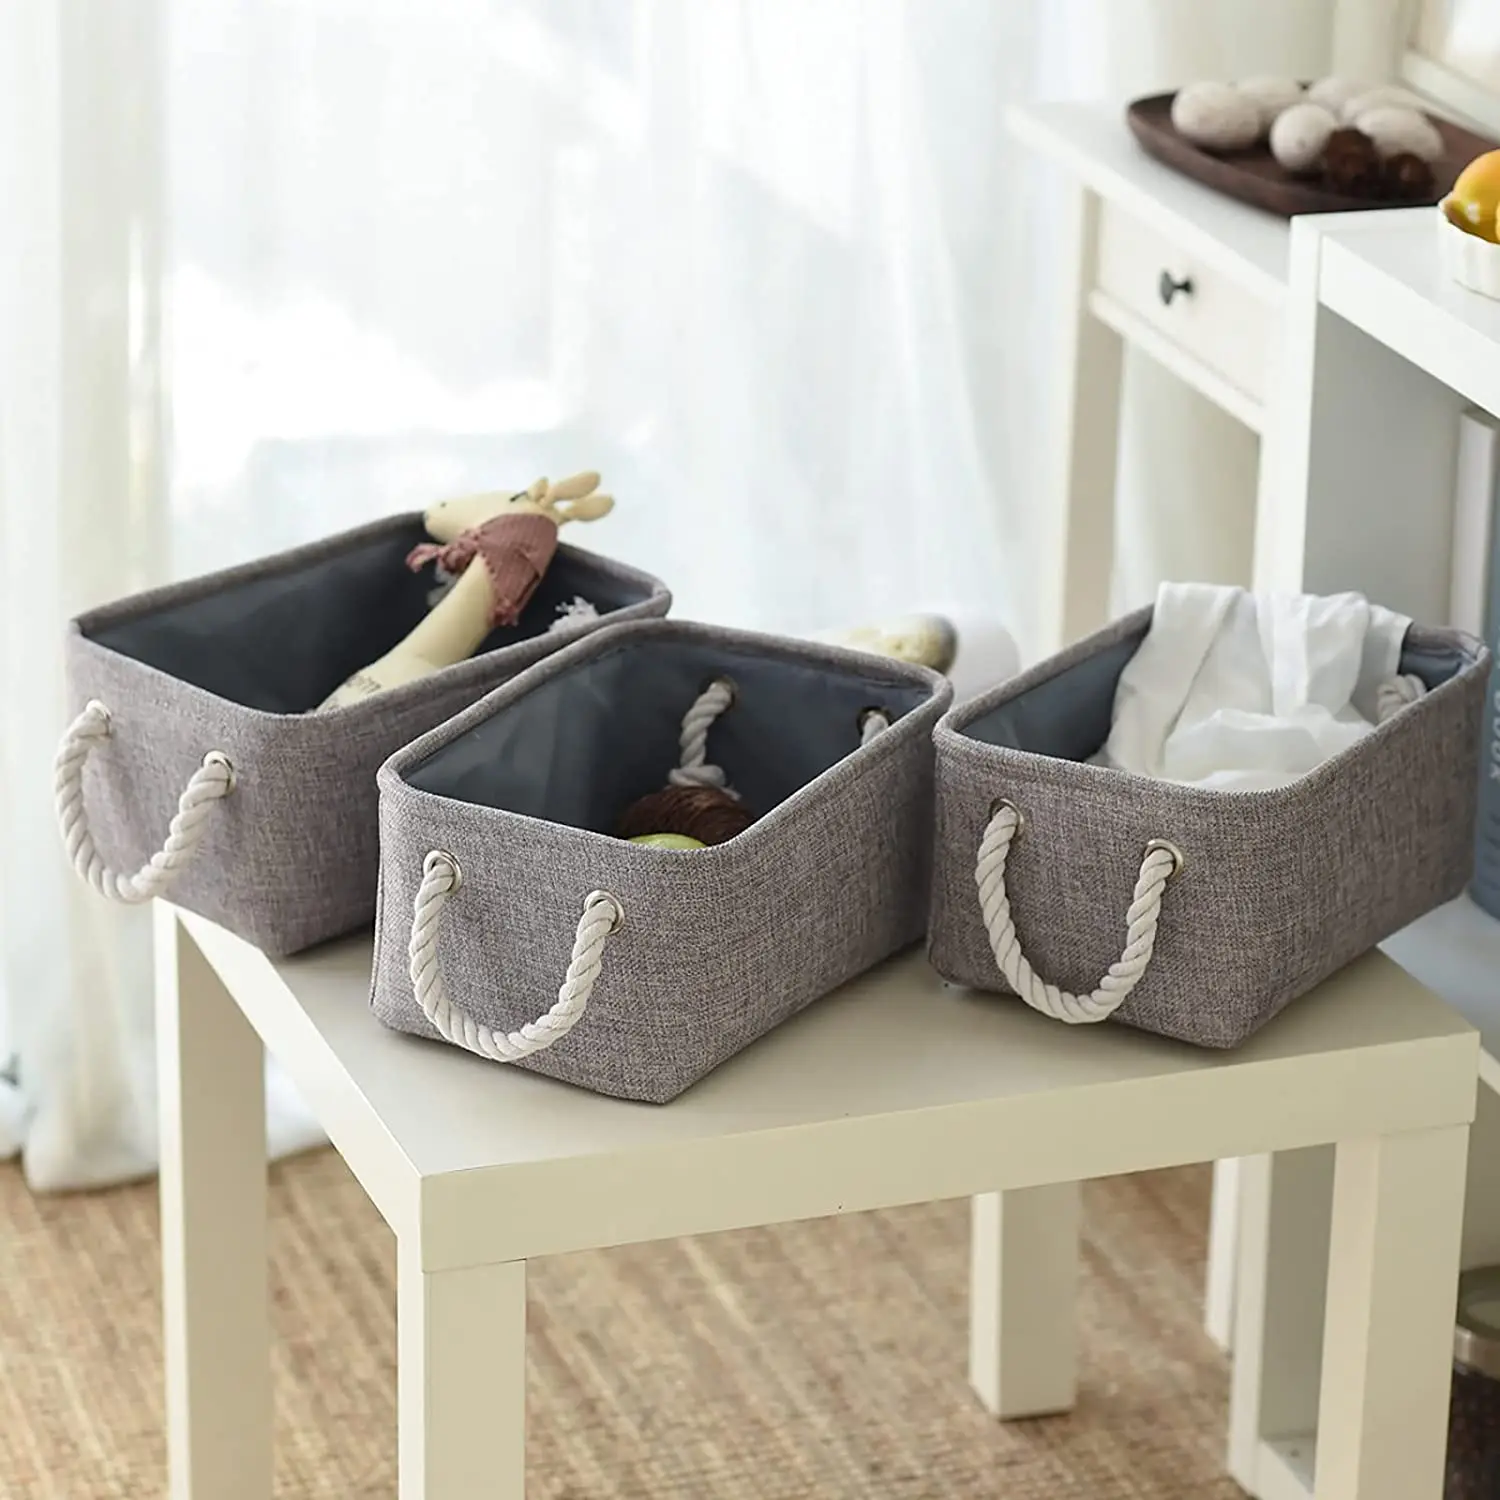 6 Pack Nursery Small Baskets for Storage Baskets for Gifts Empty Laundry Fabric Storage Baskets for Shelves White&Blue, 11.8 x 7.8 x 5.1 Foldable Storage Basket for Organizing Closets 